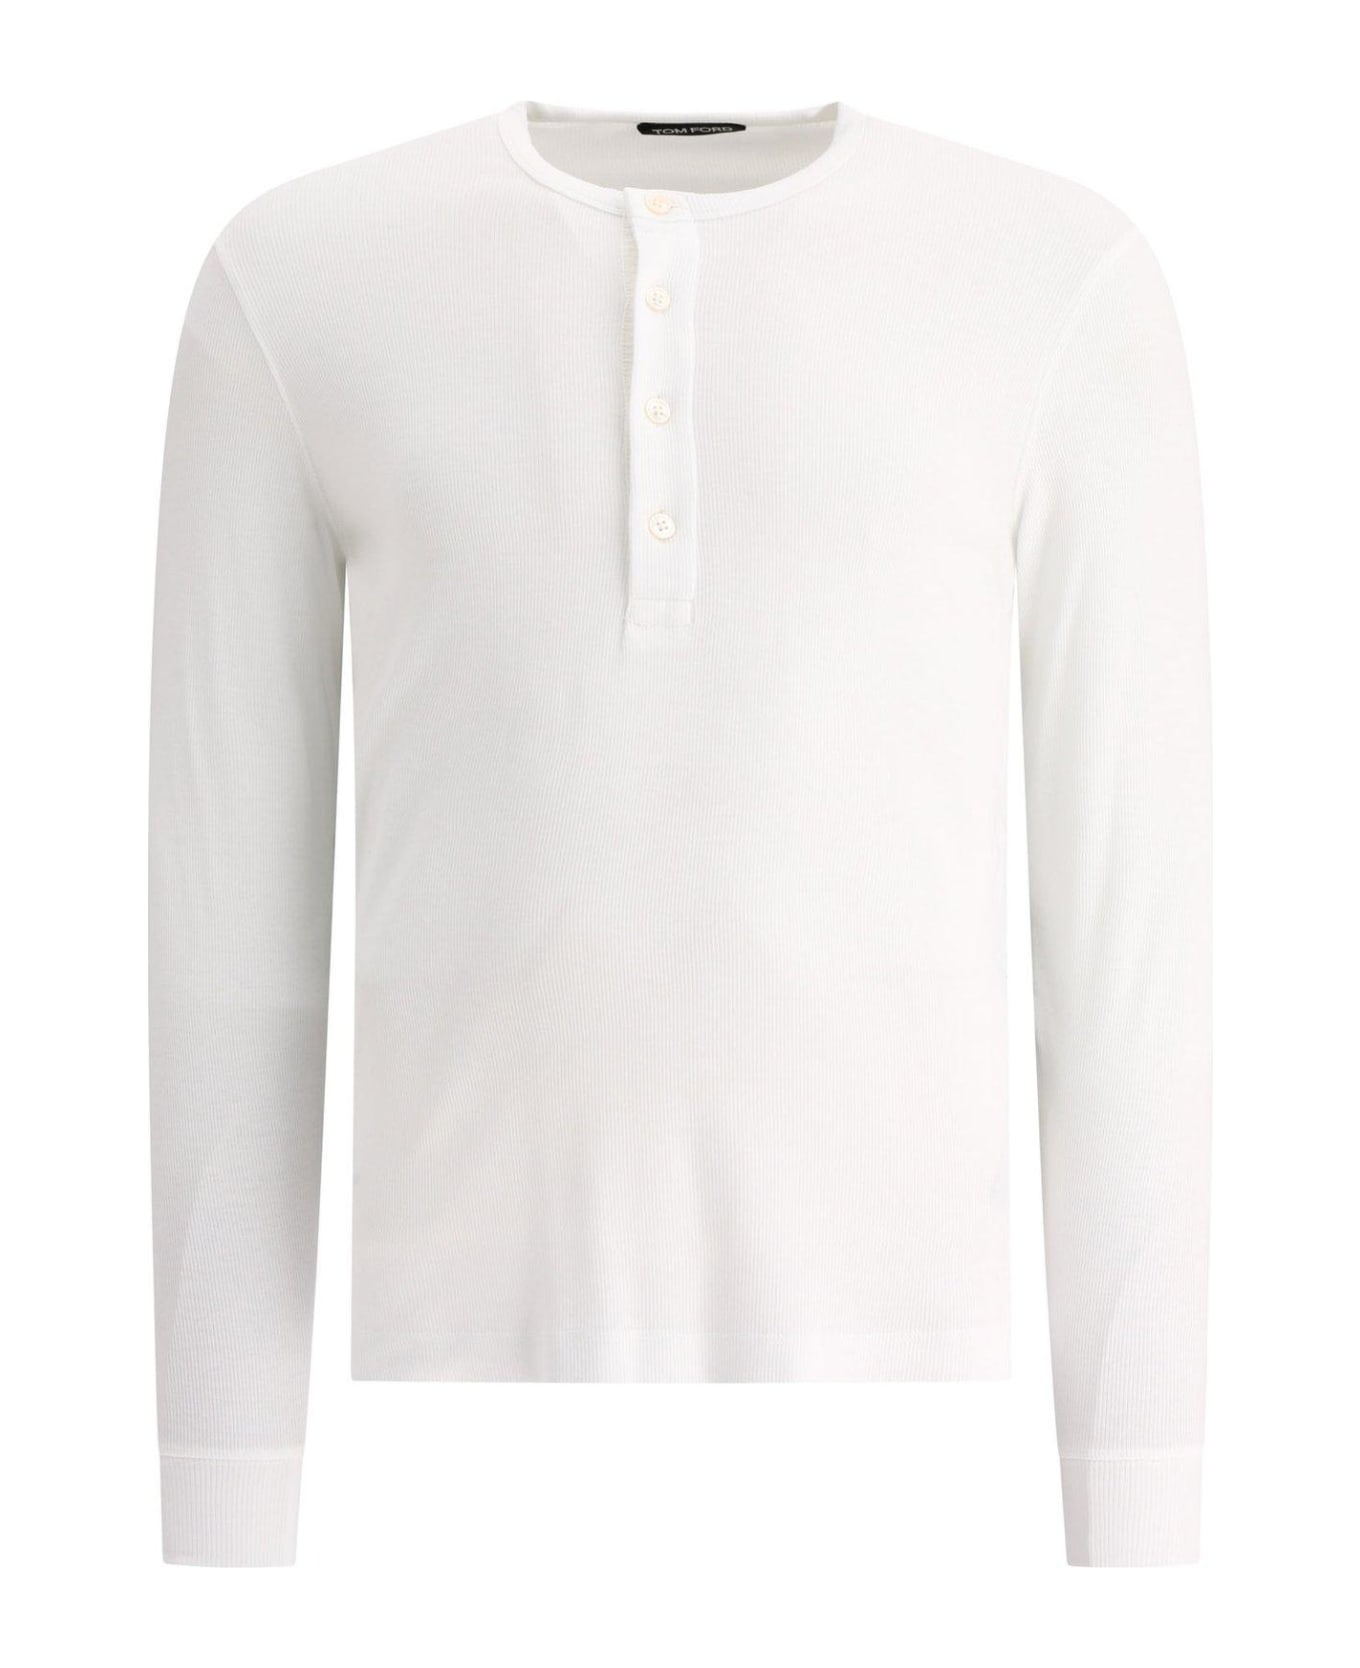 Tom Ford Buttoned Long-sleeved T-shirt - WHITE